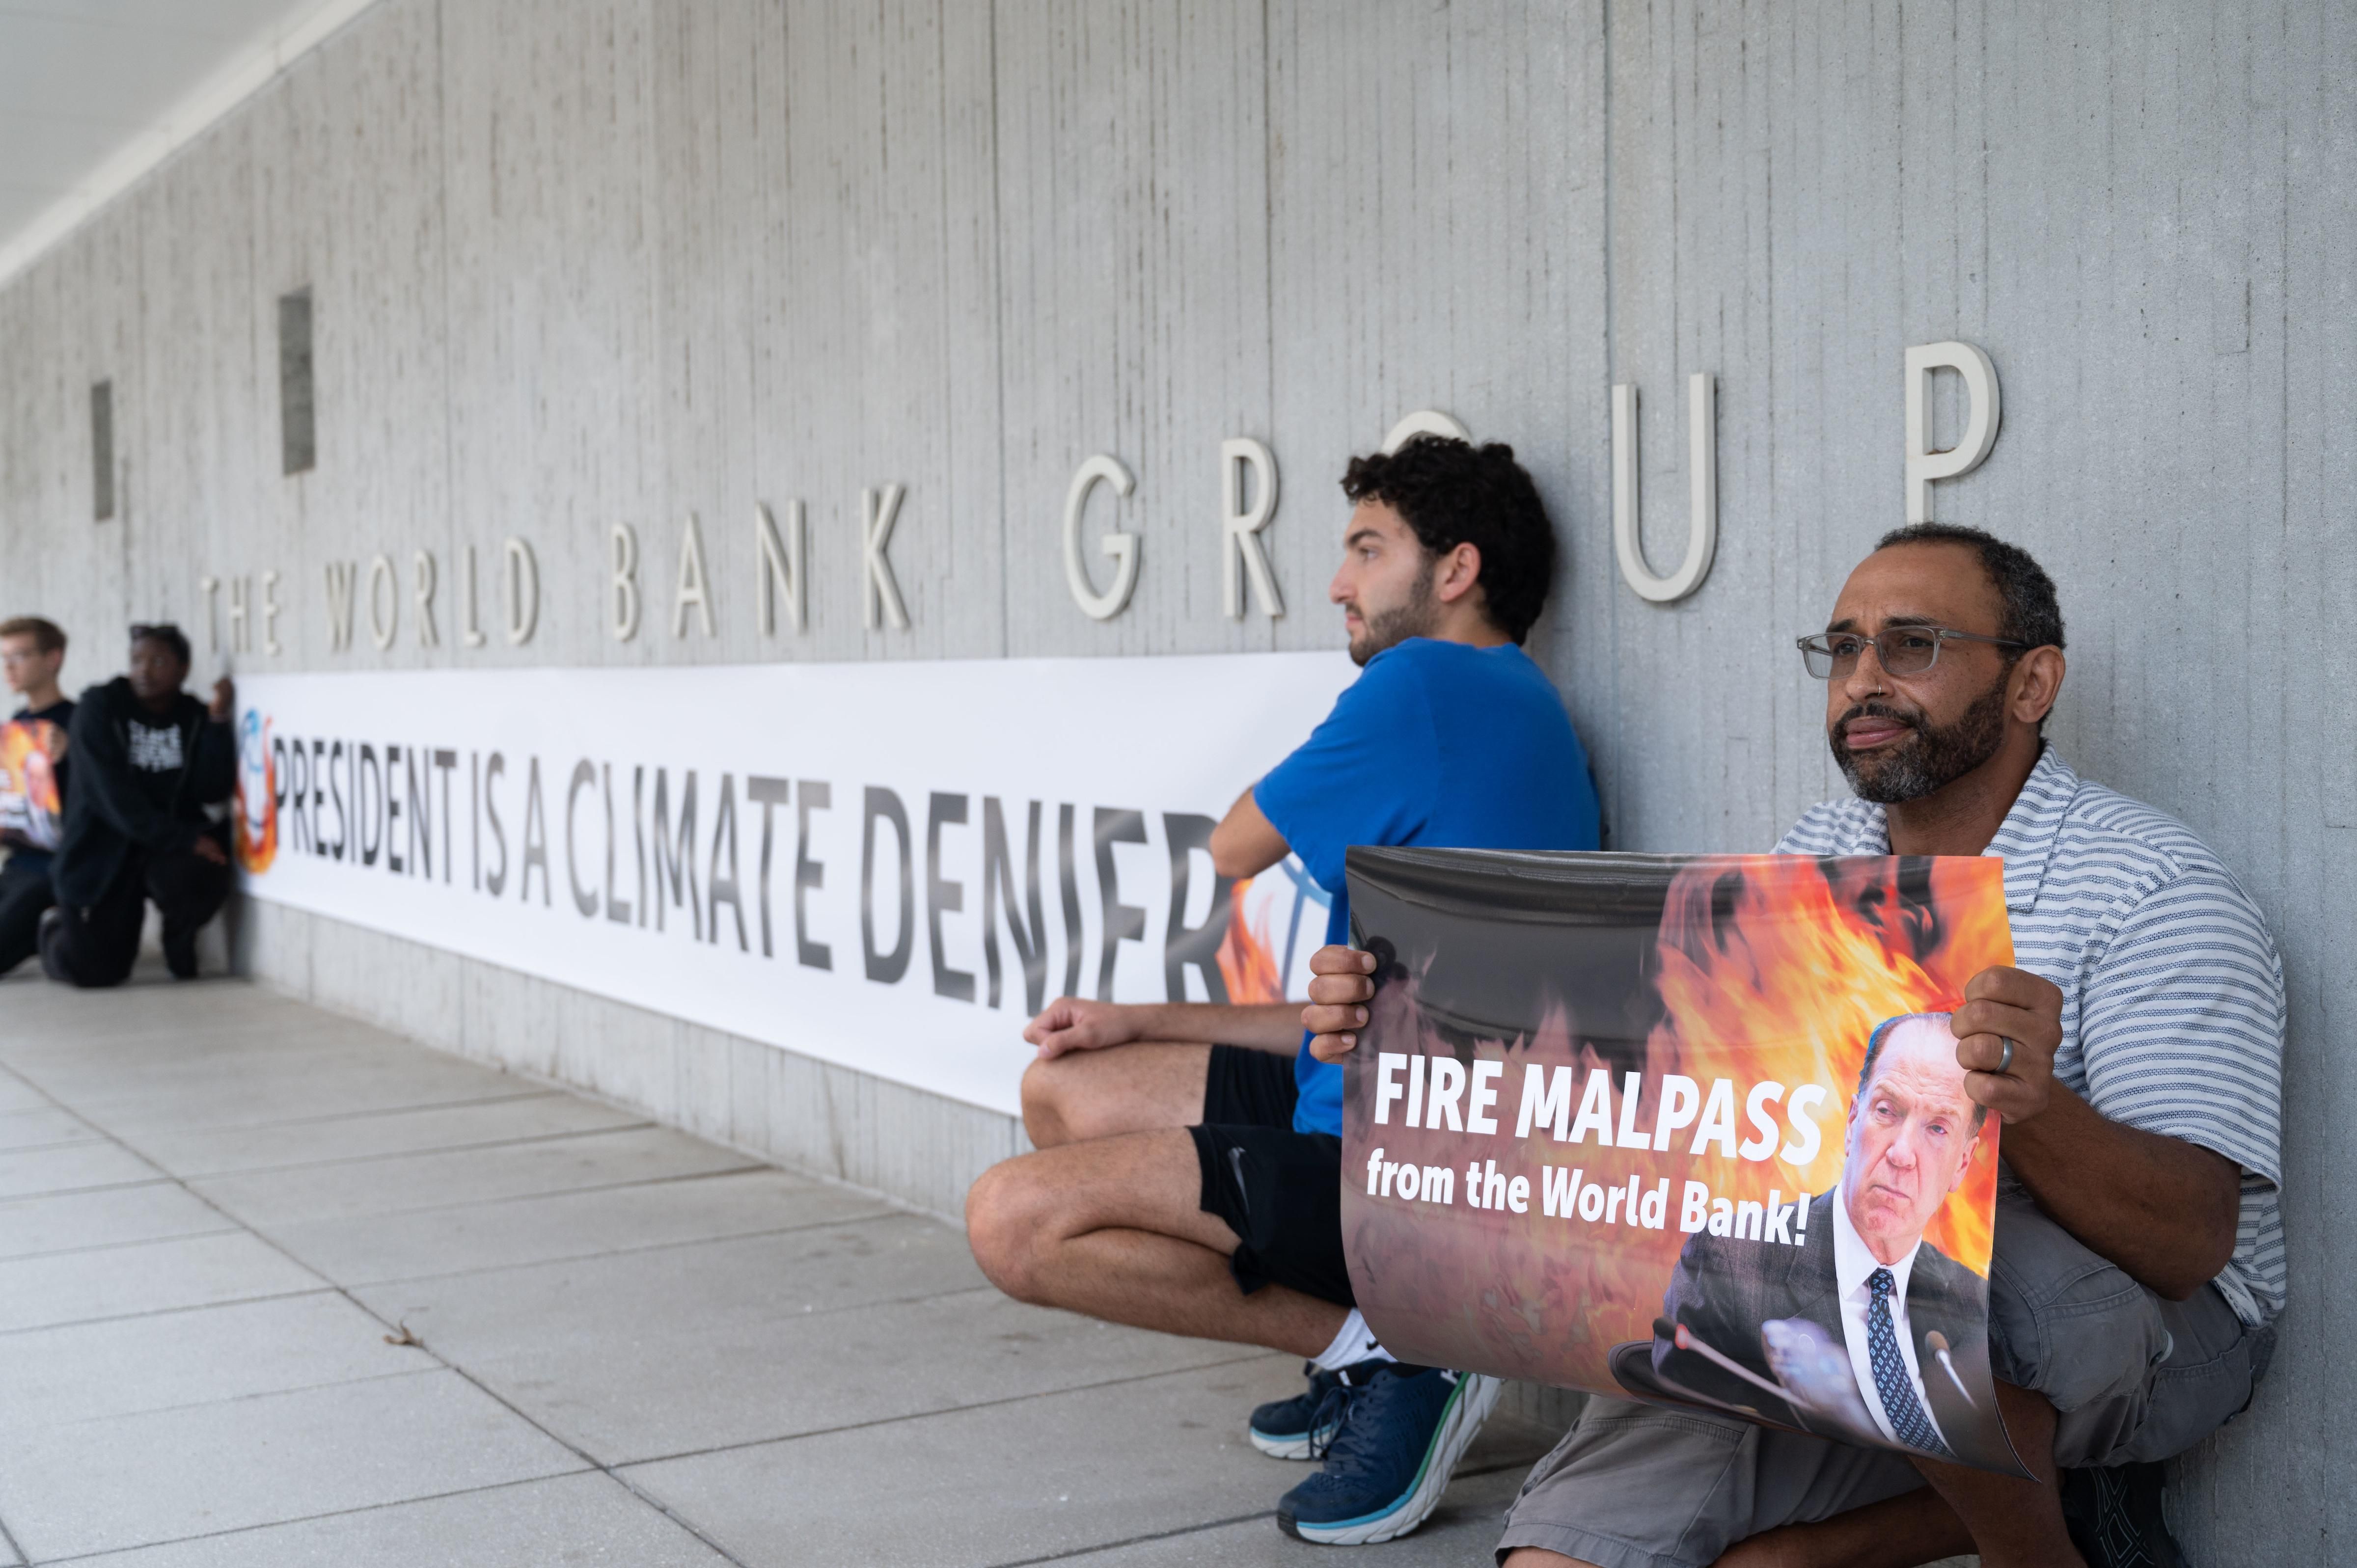 Activists display a banner describing World Bank President David Malpass as a climate denier in front of the bank's headquarters in Washington, D.C. on September 22, 2022.